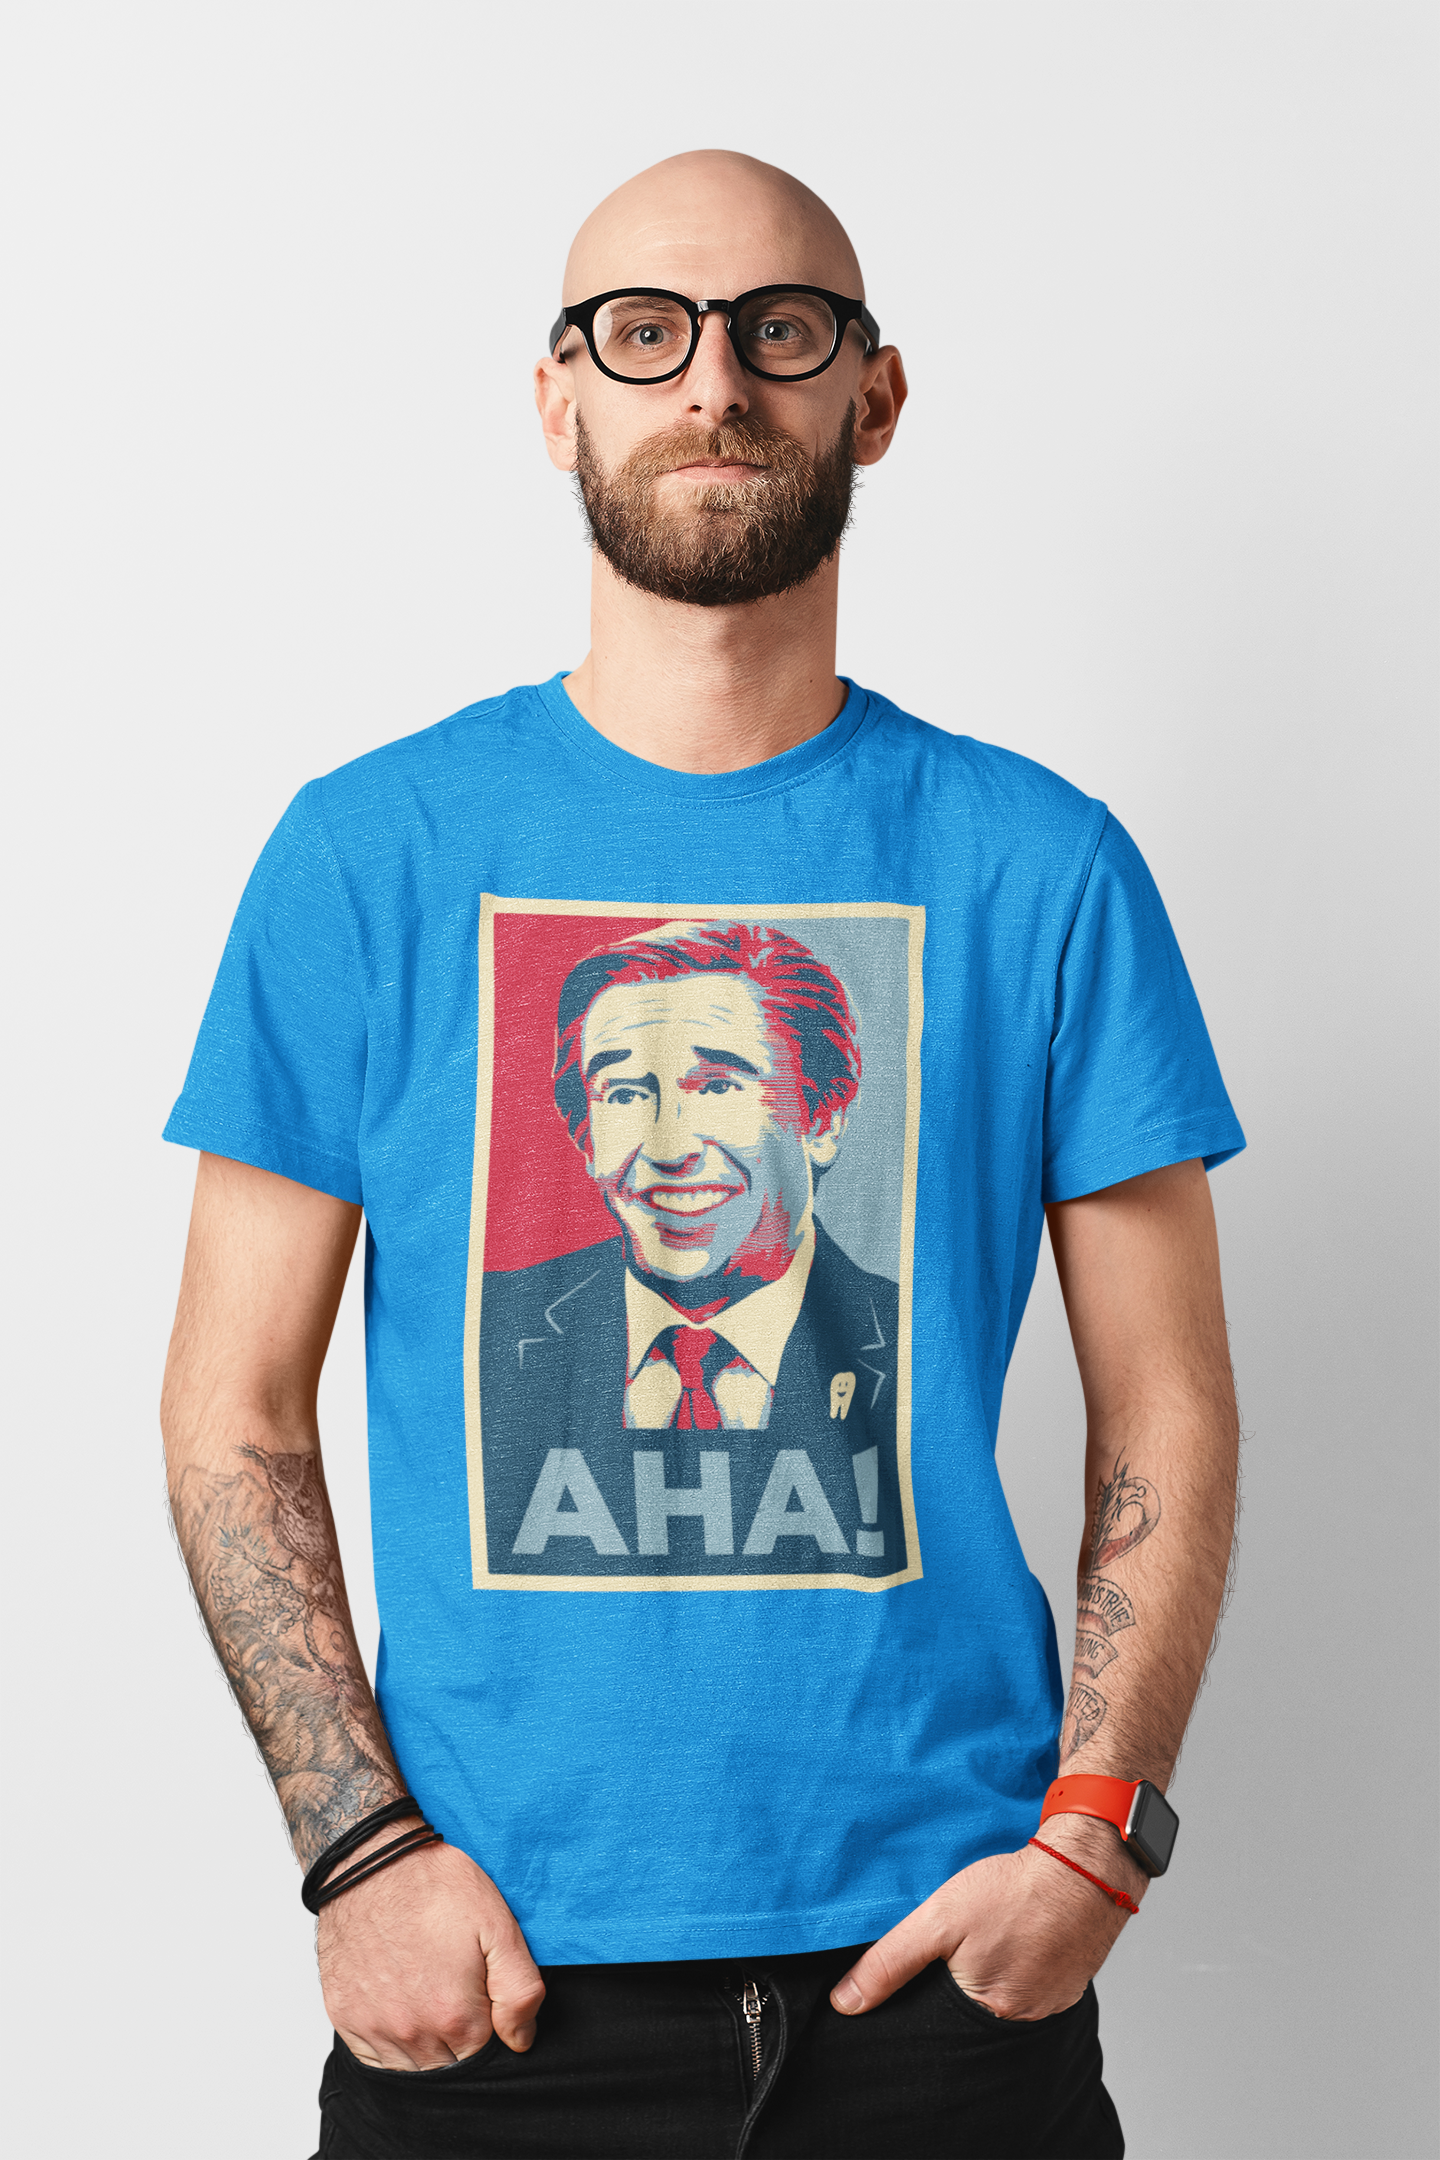 Alan Partridge "AHA" T Shirt - Funny British Comedy TV Show Tee for Fans - Iconic Catchphrase Shirt